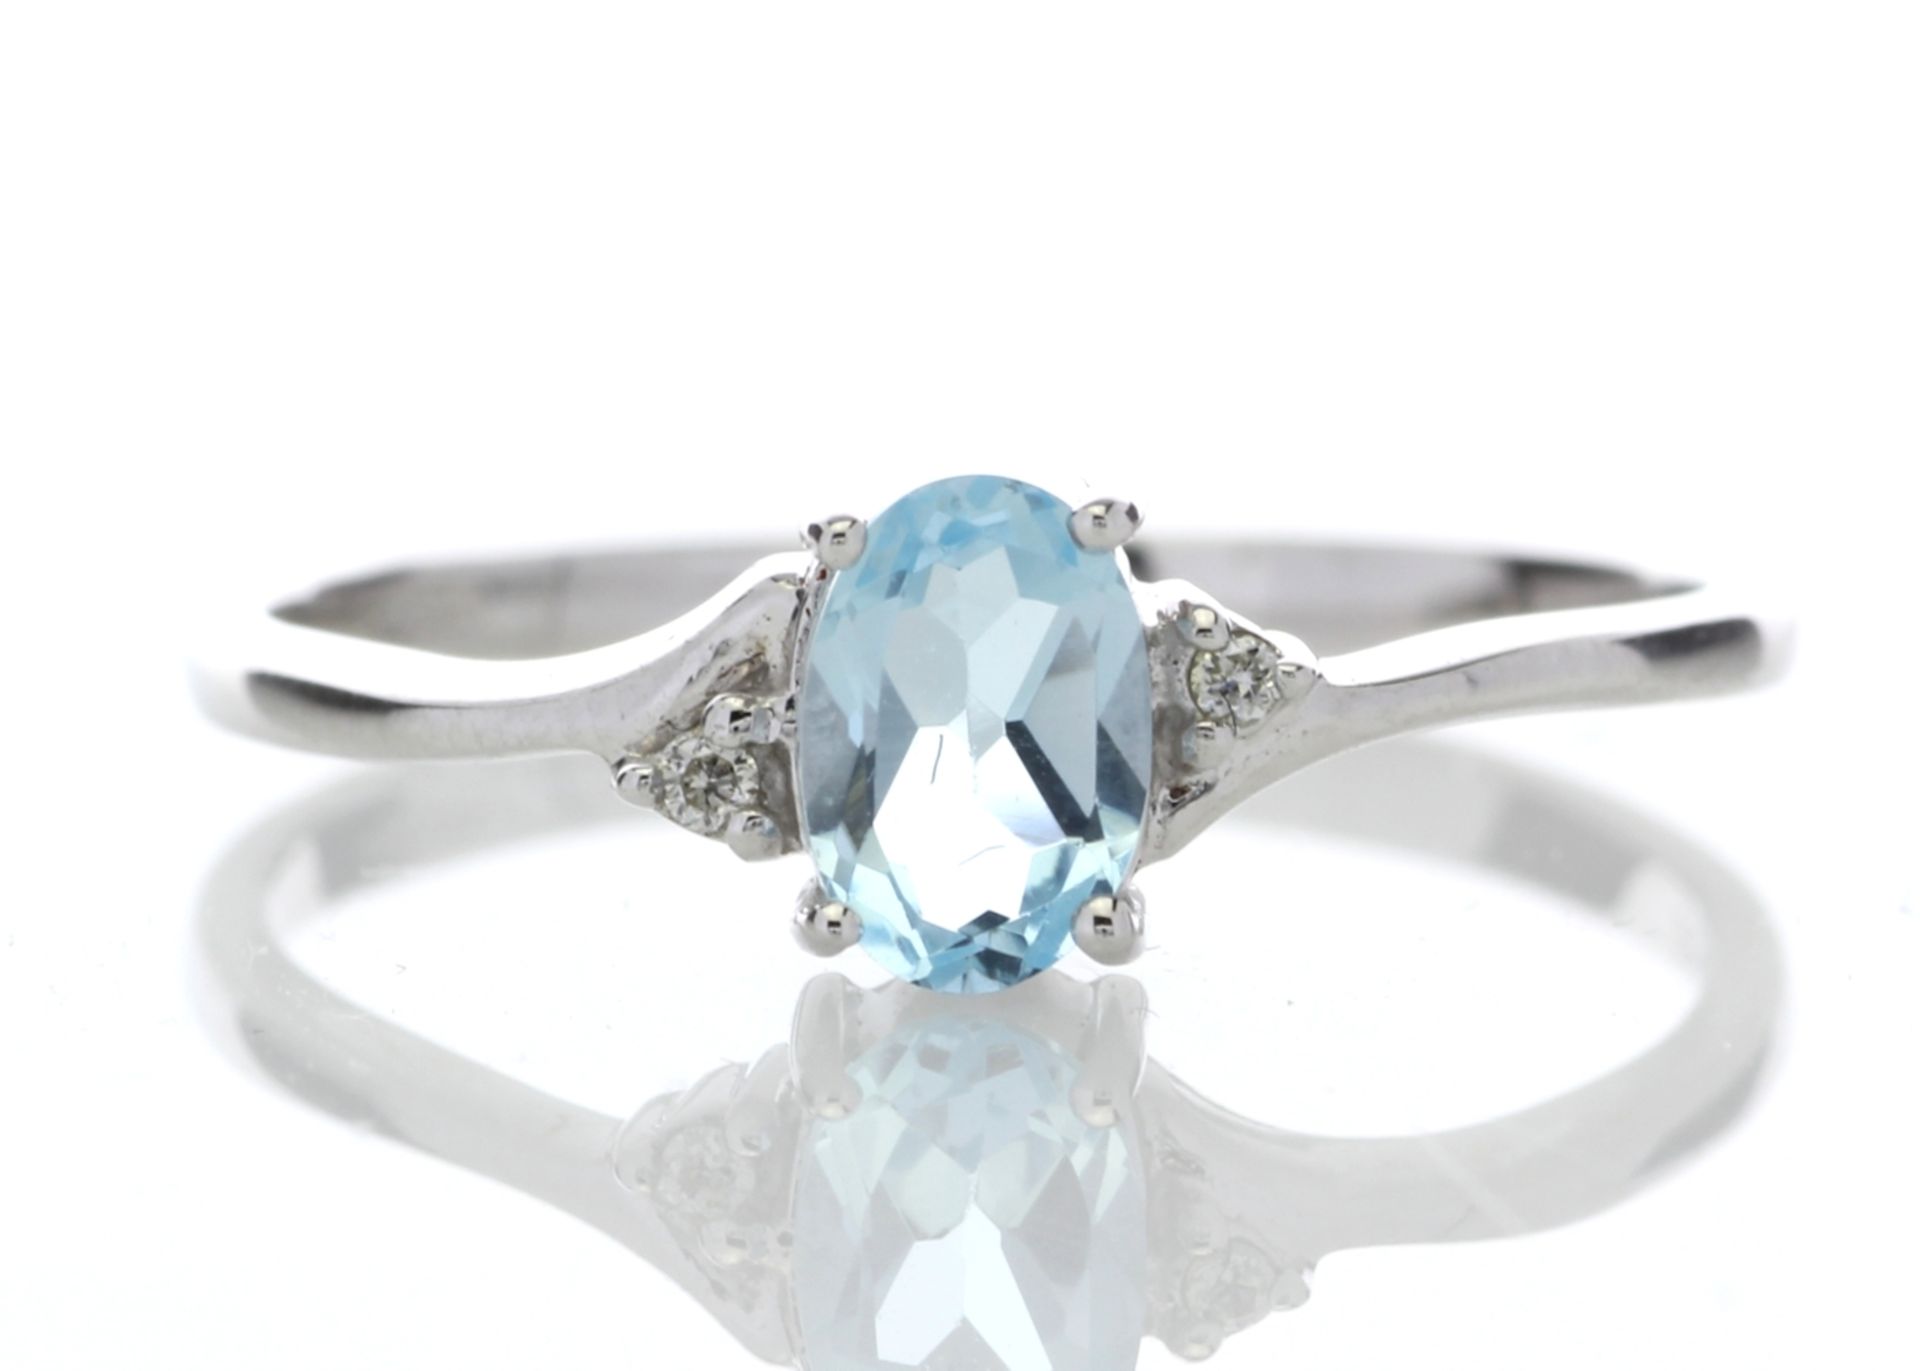 9ct White Gold Diamond and Oval Shape Blue Topaz Ring 0.01 Carats - Valued by AGI £650.00 - 9ct - Image 5 of 8